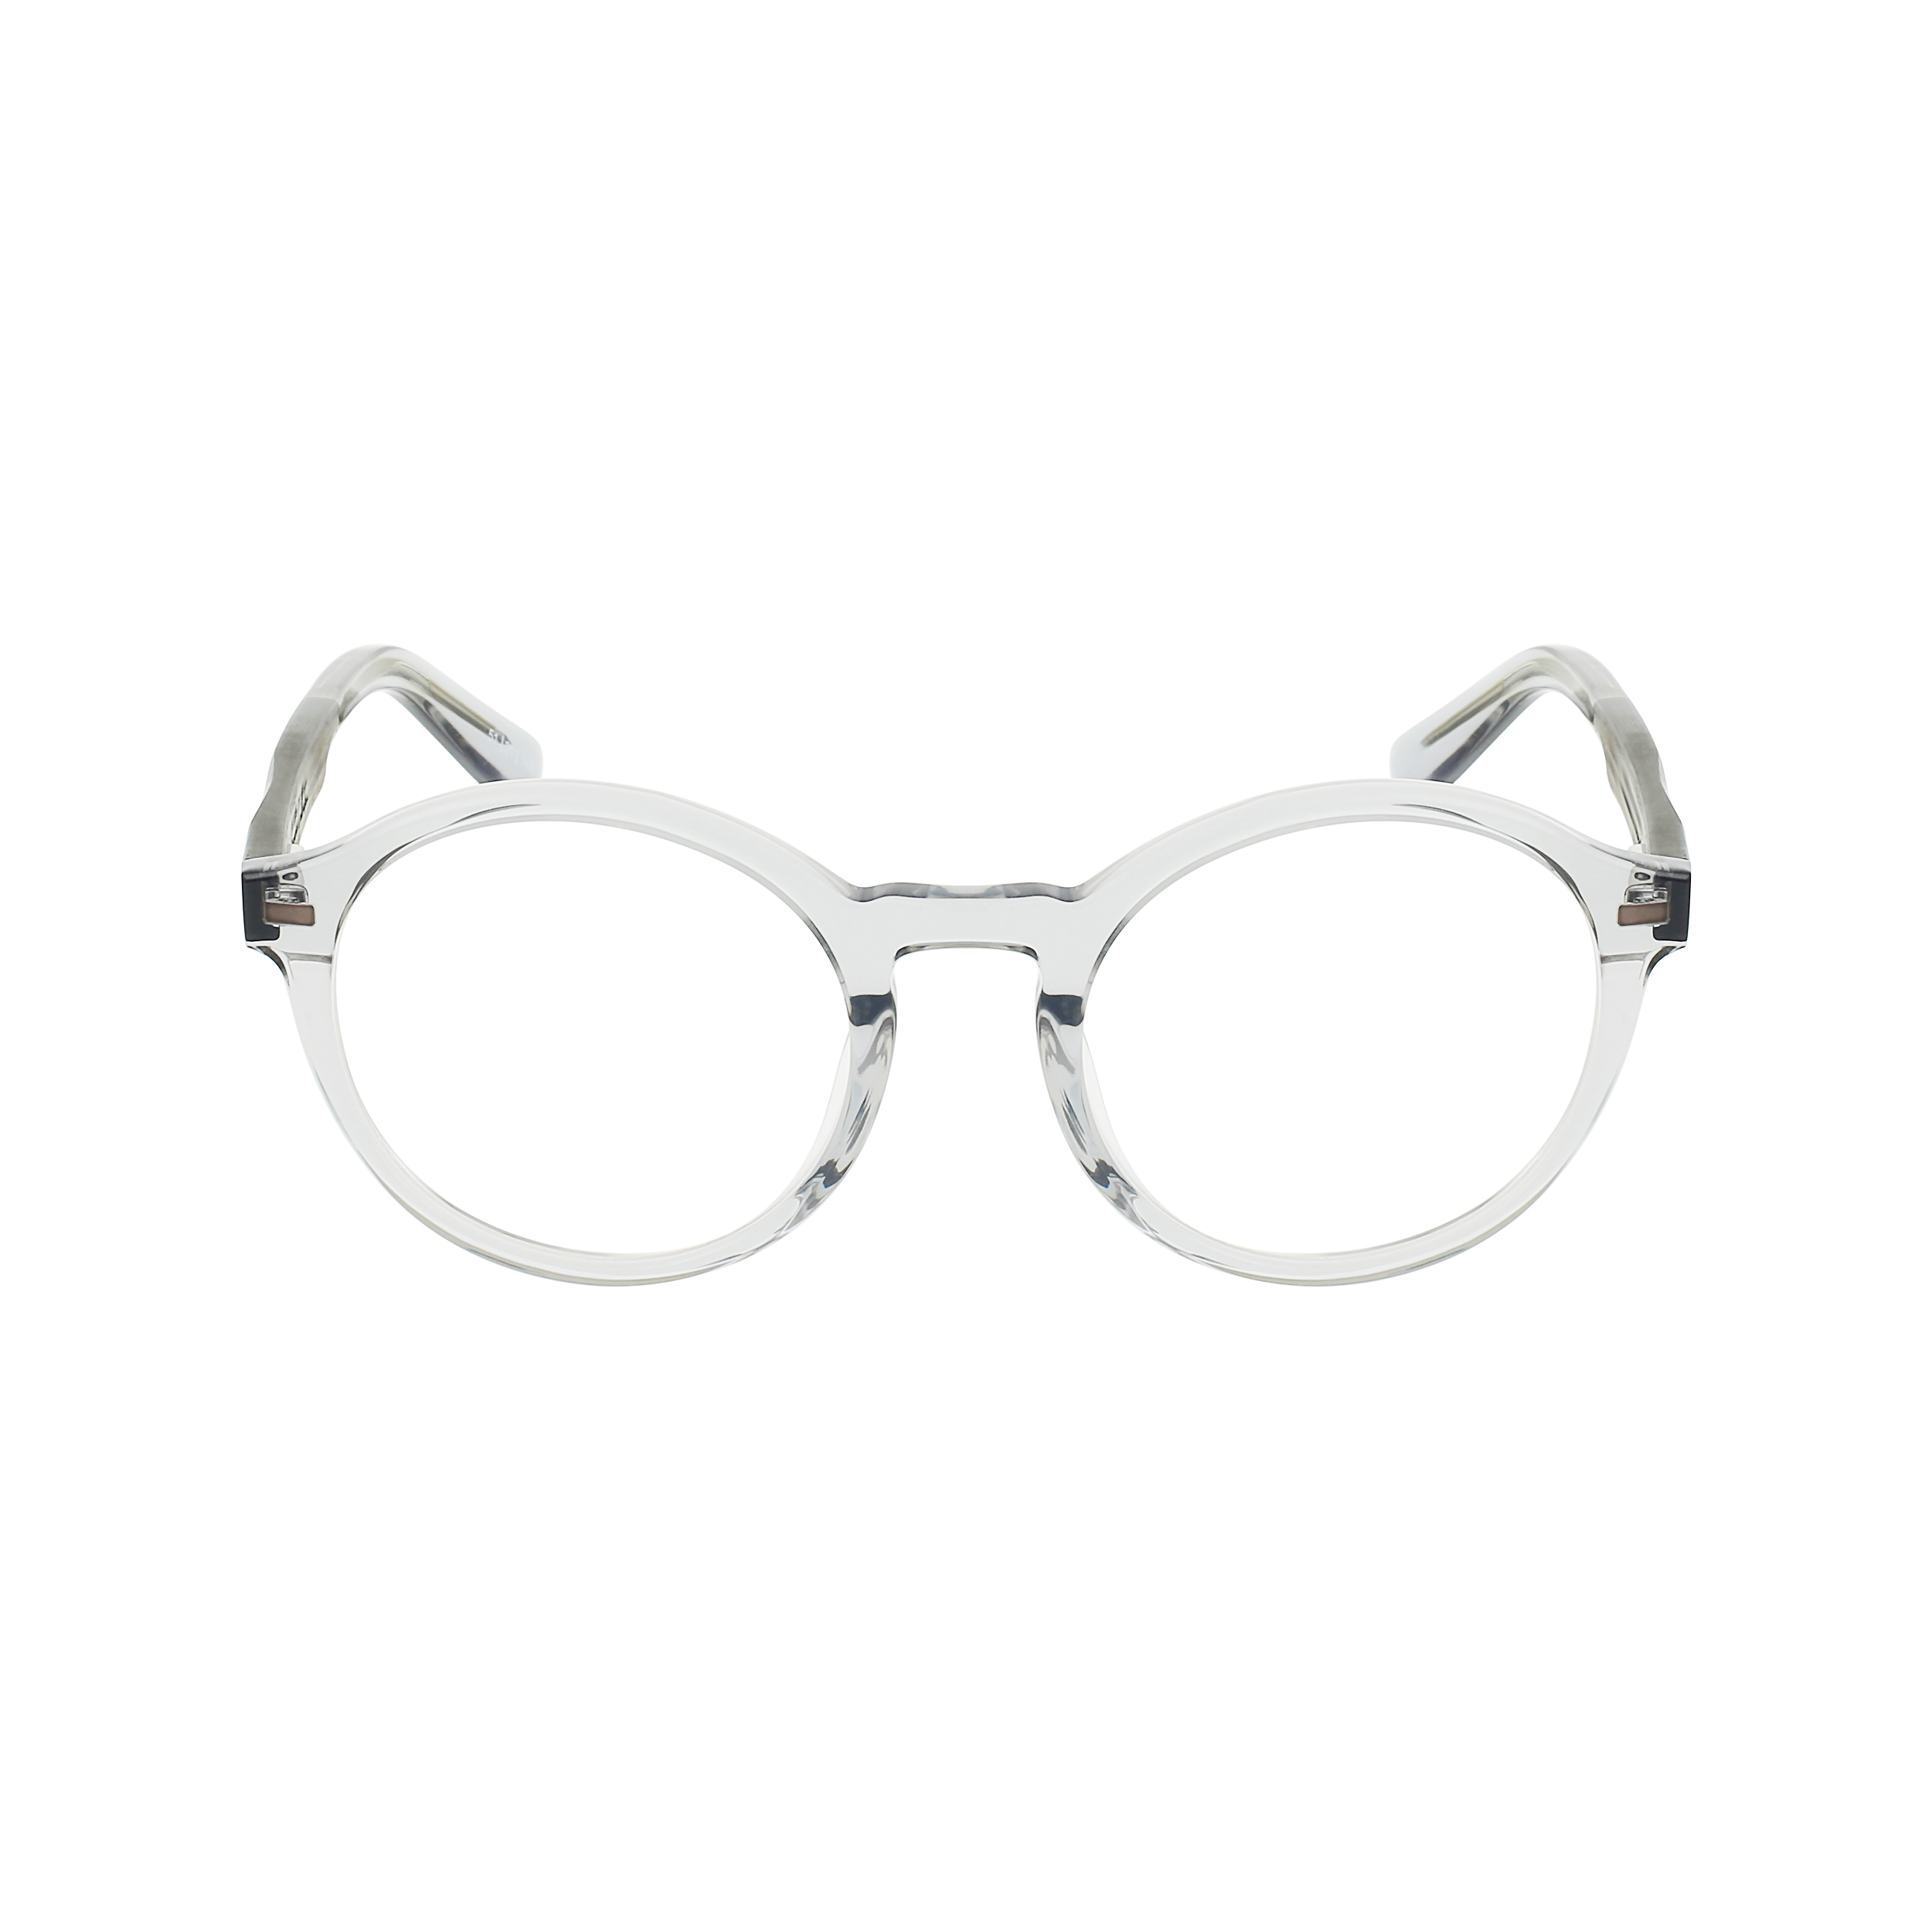 UFO Eyeglasses Frame - Tinted Crystal- Johnny Fly | UFO-TCRY-RX-BWAL | | 